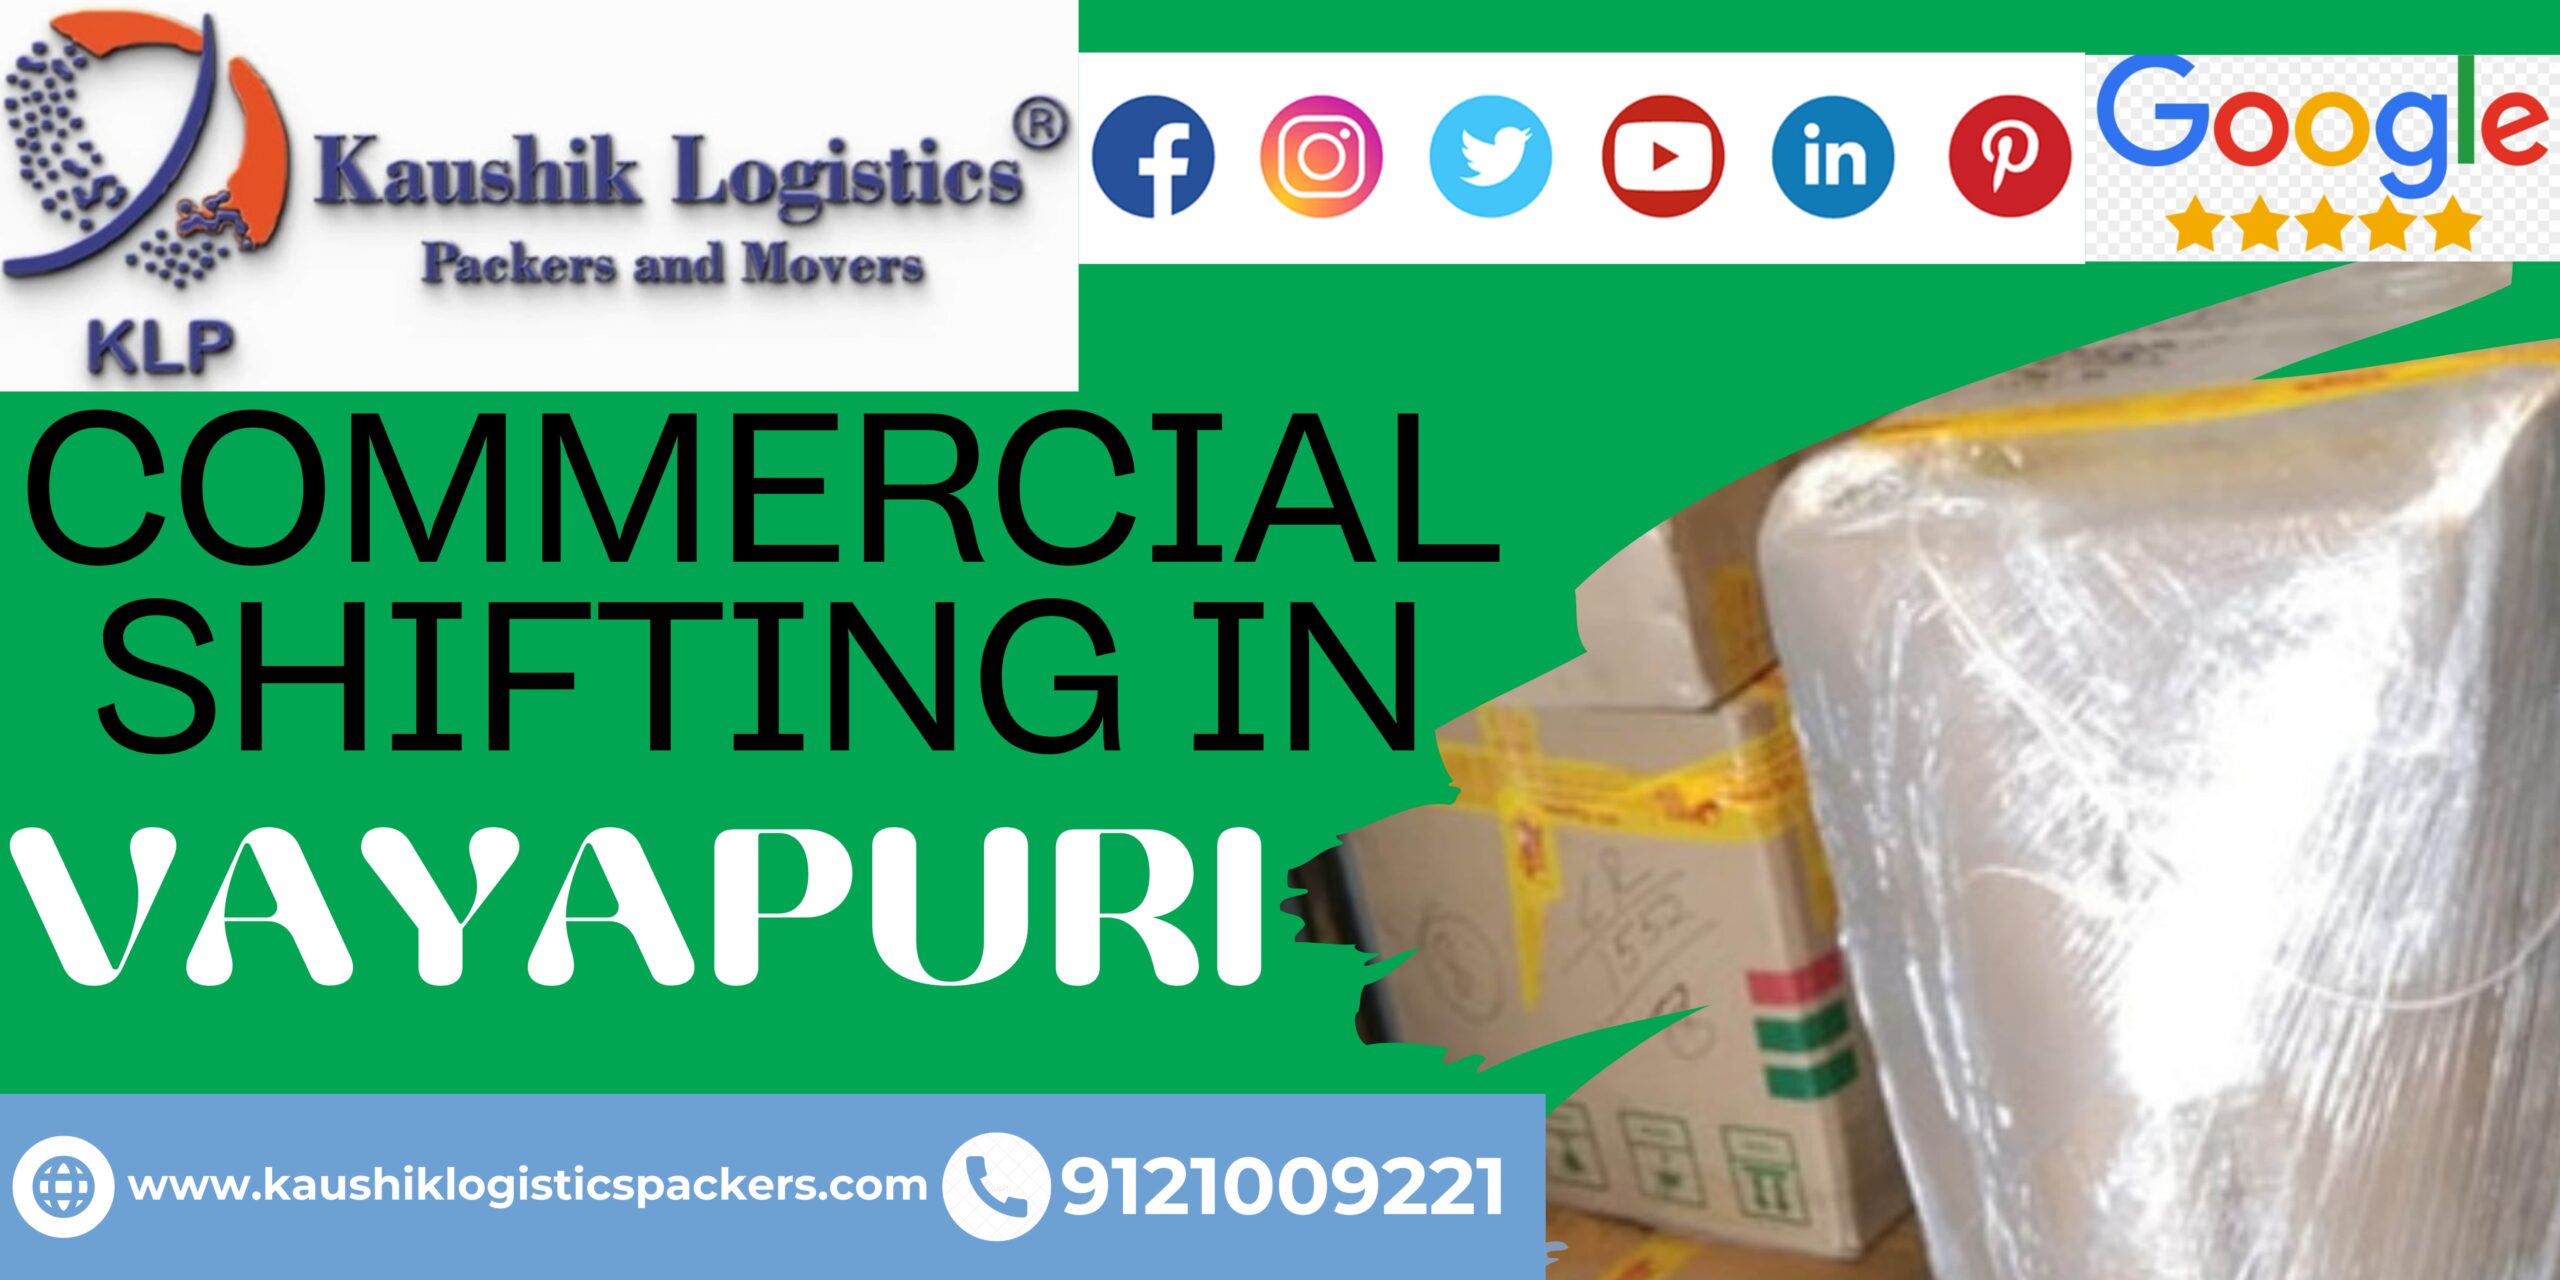 Packers and Movers In Vayupuri